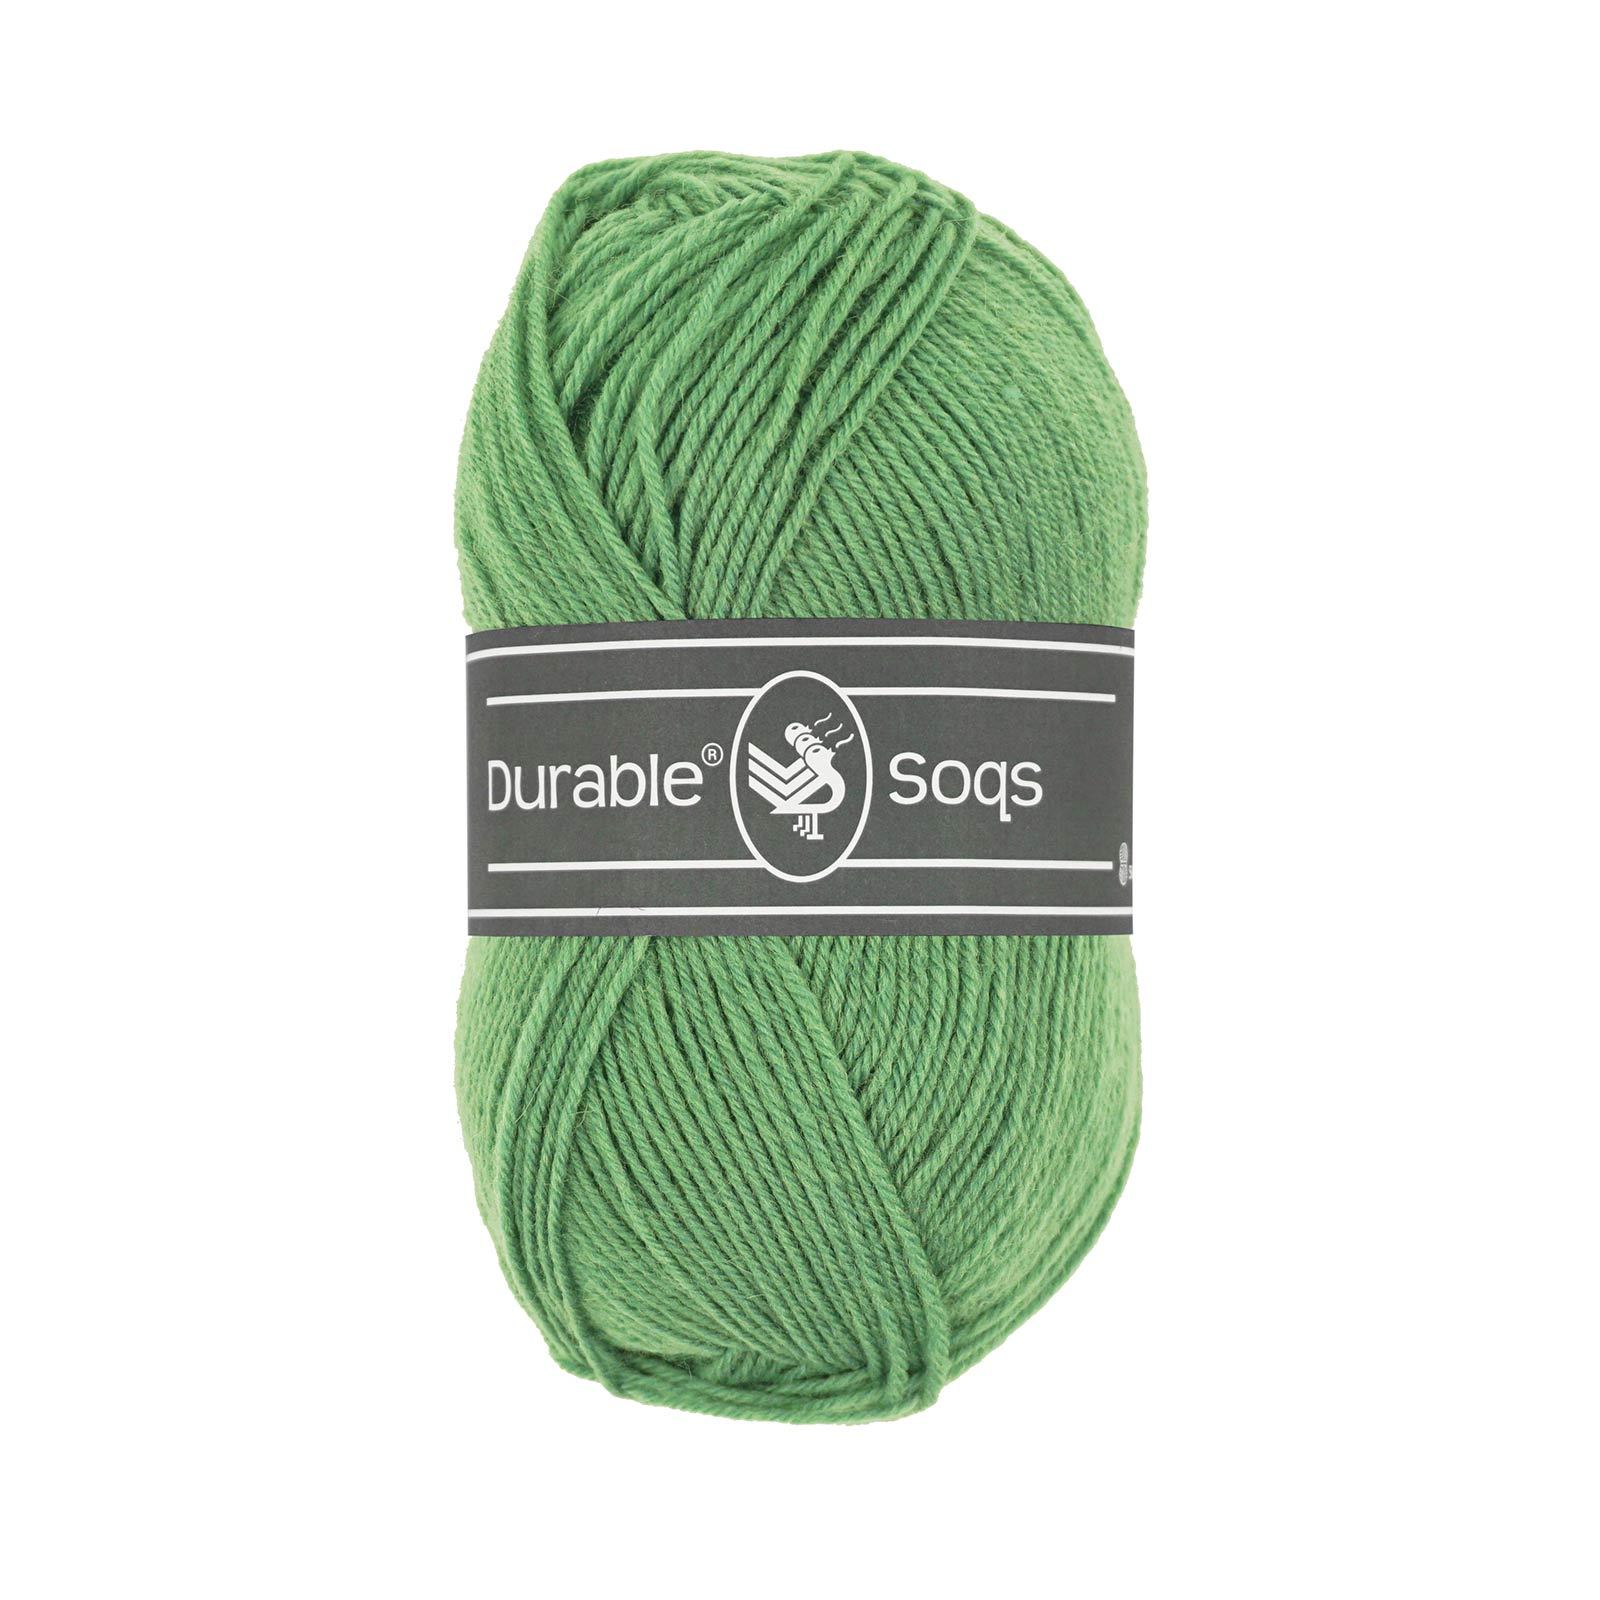 DUrable soqs 2133